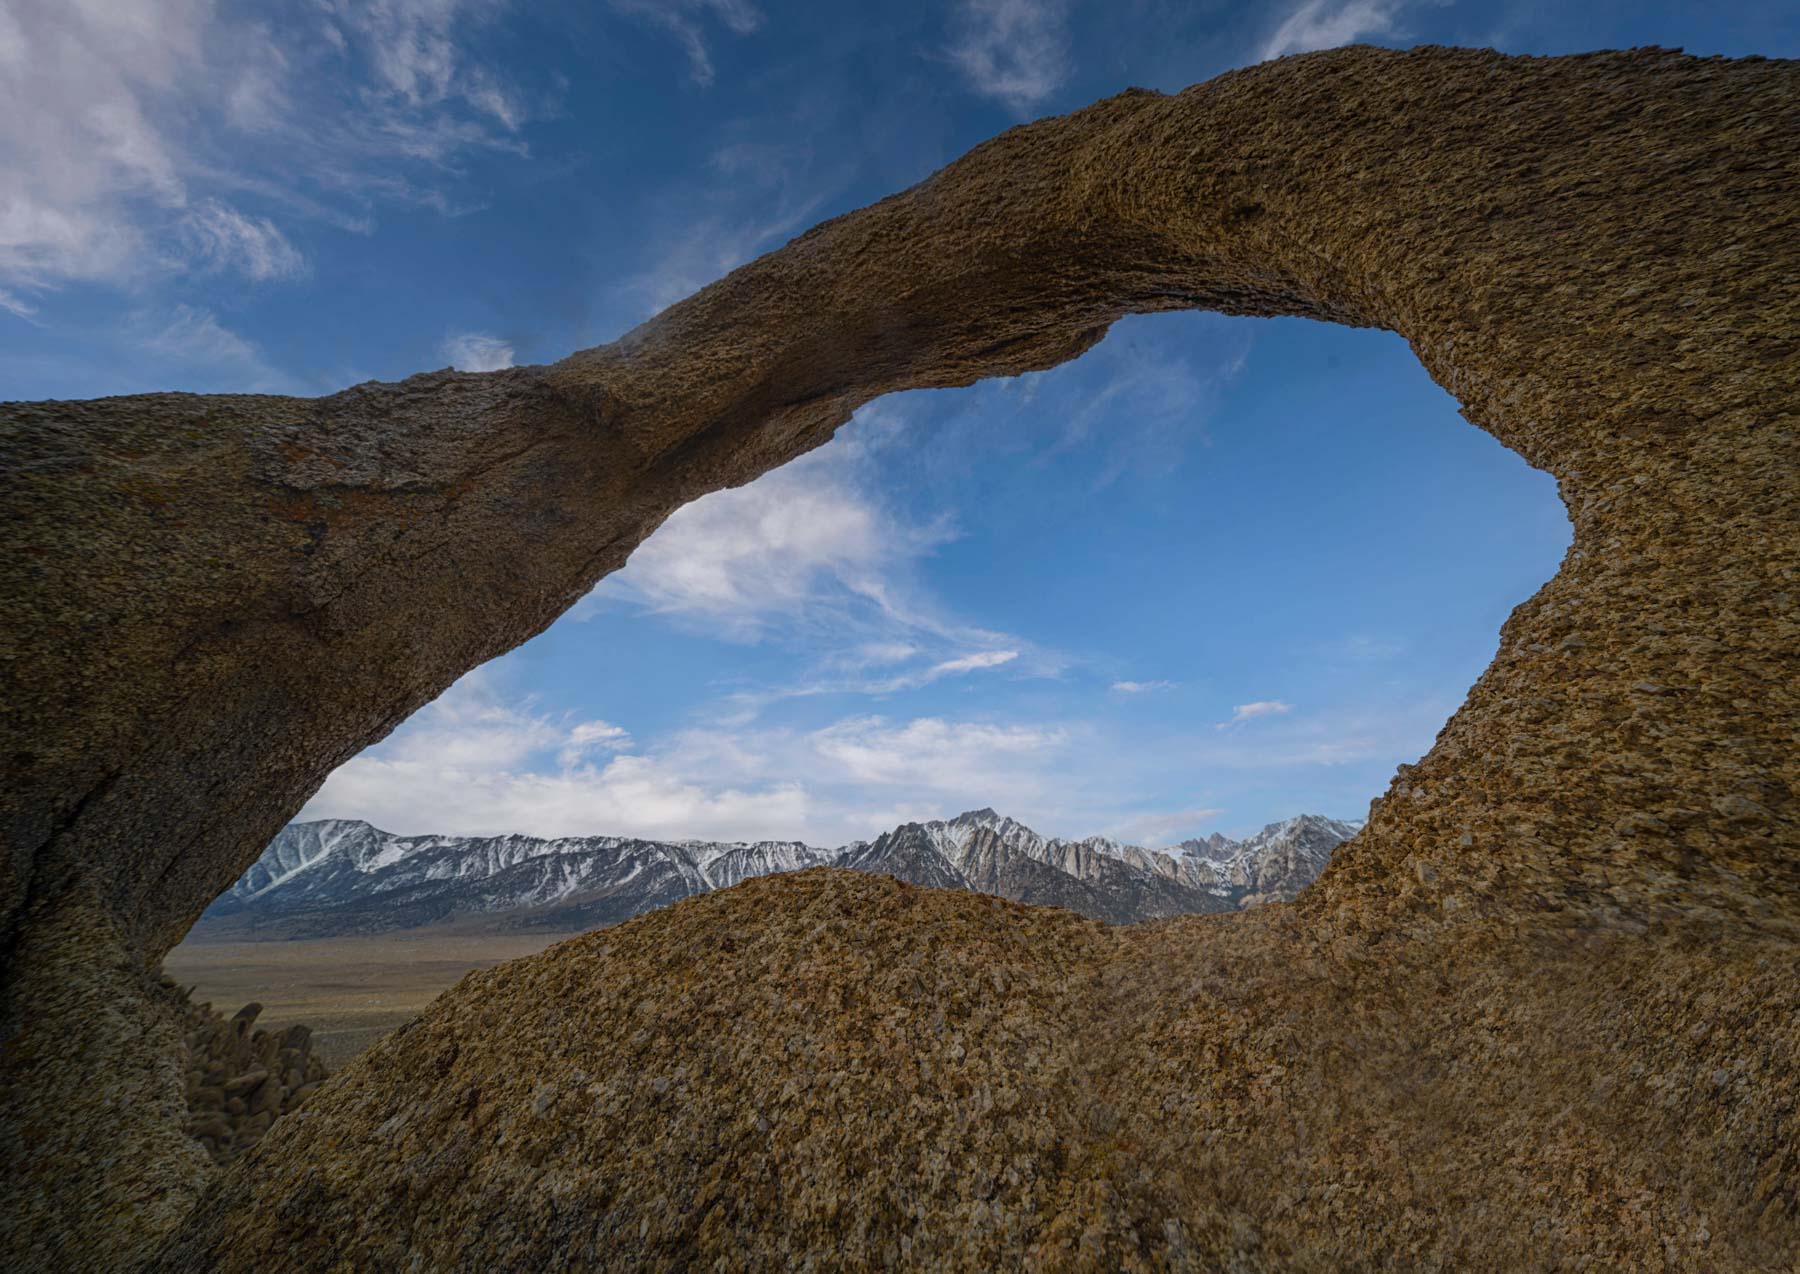 Whitney Portal Arch shot from a ladder in Alabama Hills